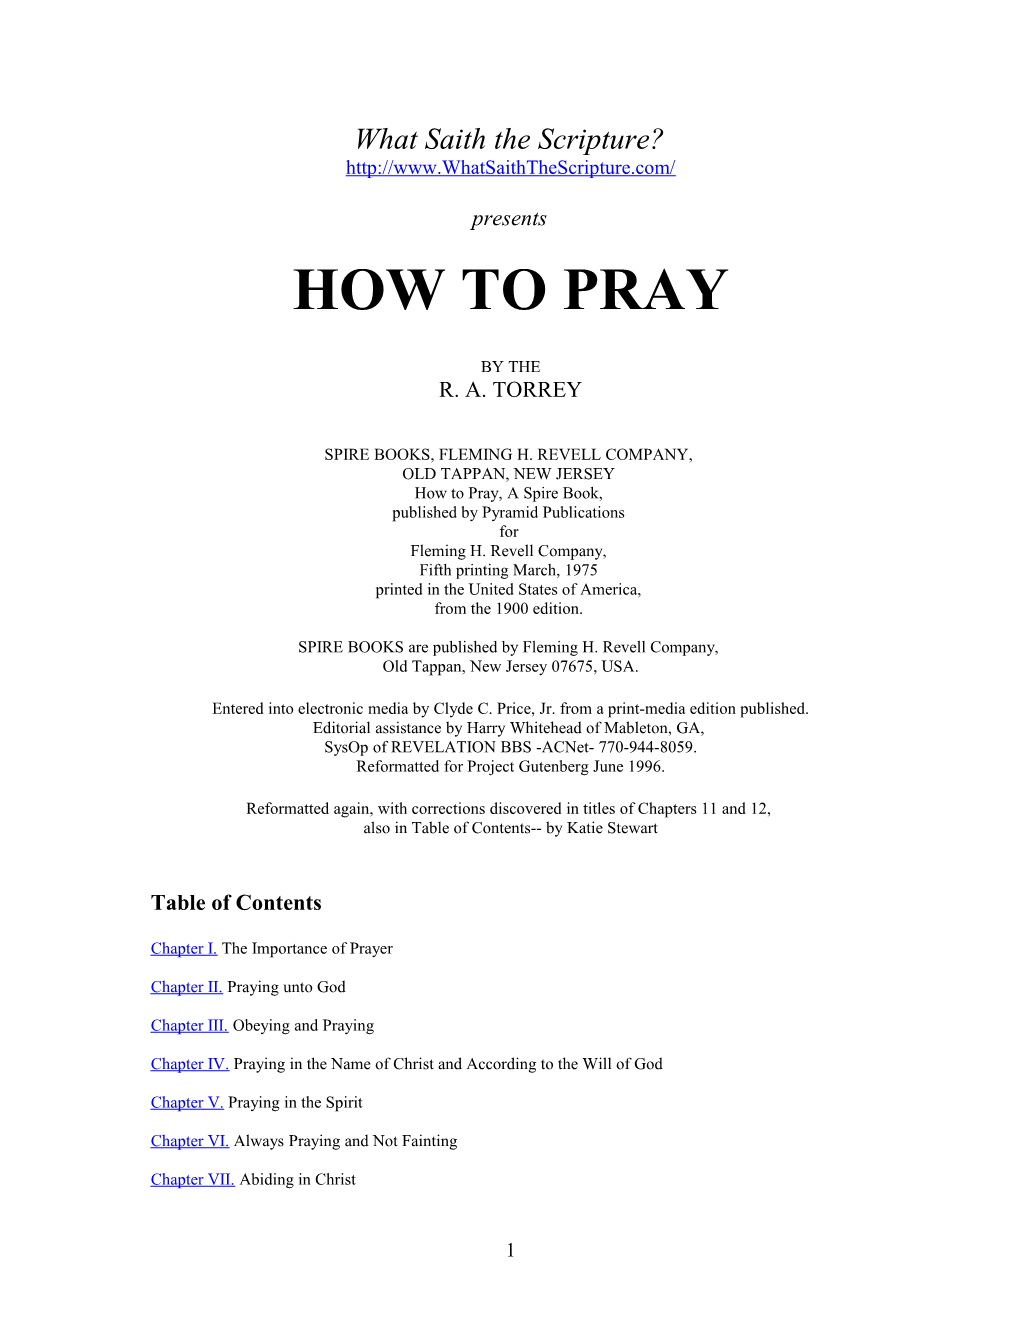 How to Pray Text by R. A. Torrey